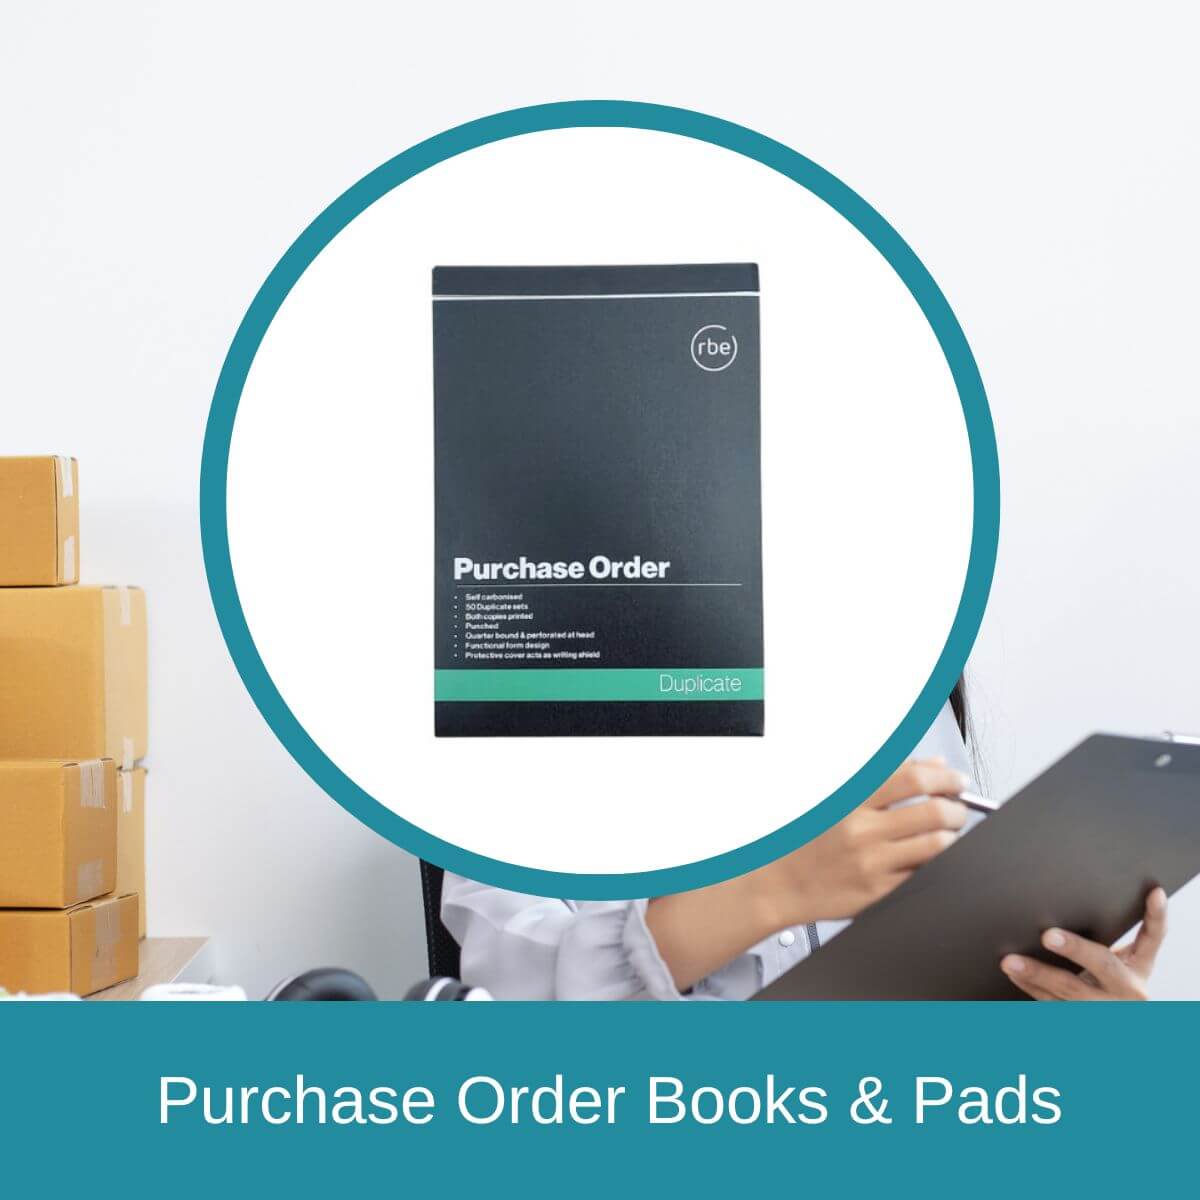 Purchase Order Books & Pads Product Options